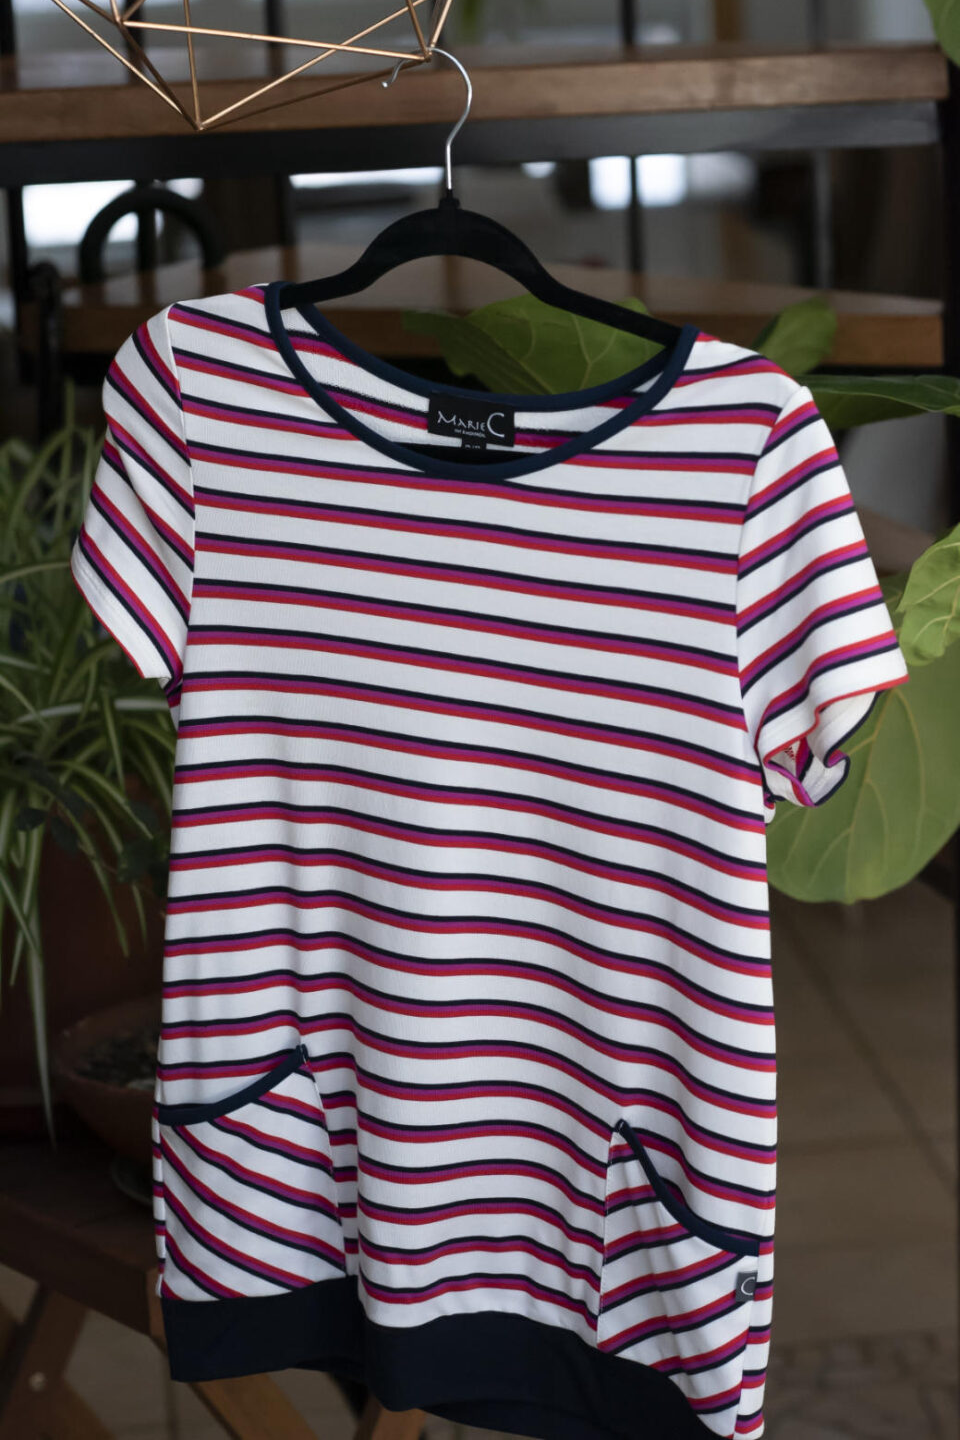 Vuela Top by Marie C, Stripe, contrast trim at neckline and on patch pockets, band at hem, eco-friendly, OEKO-TEX certified, bamboo rayon and cotton, sizes XS to XL, made in Montreal 